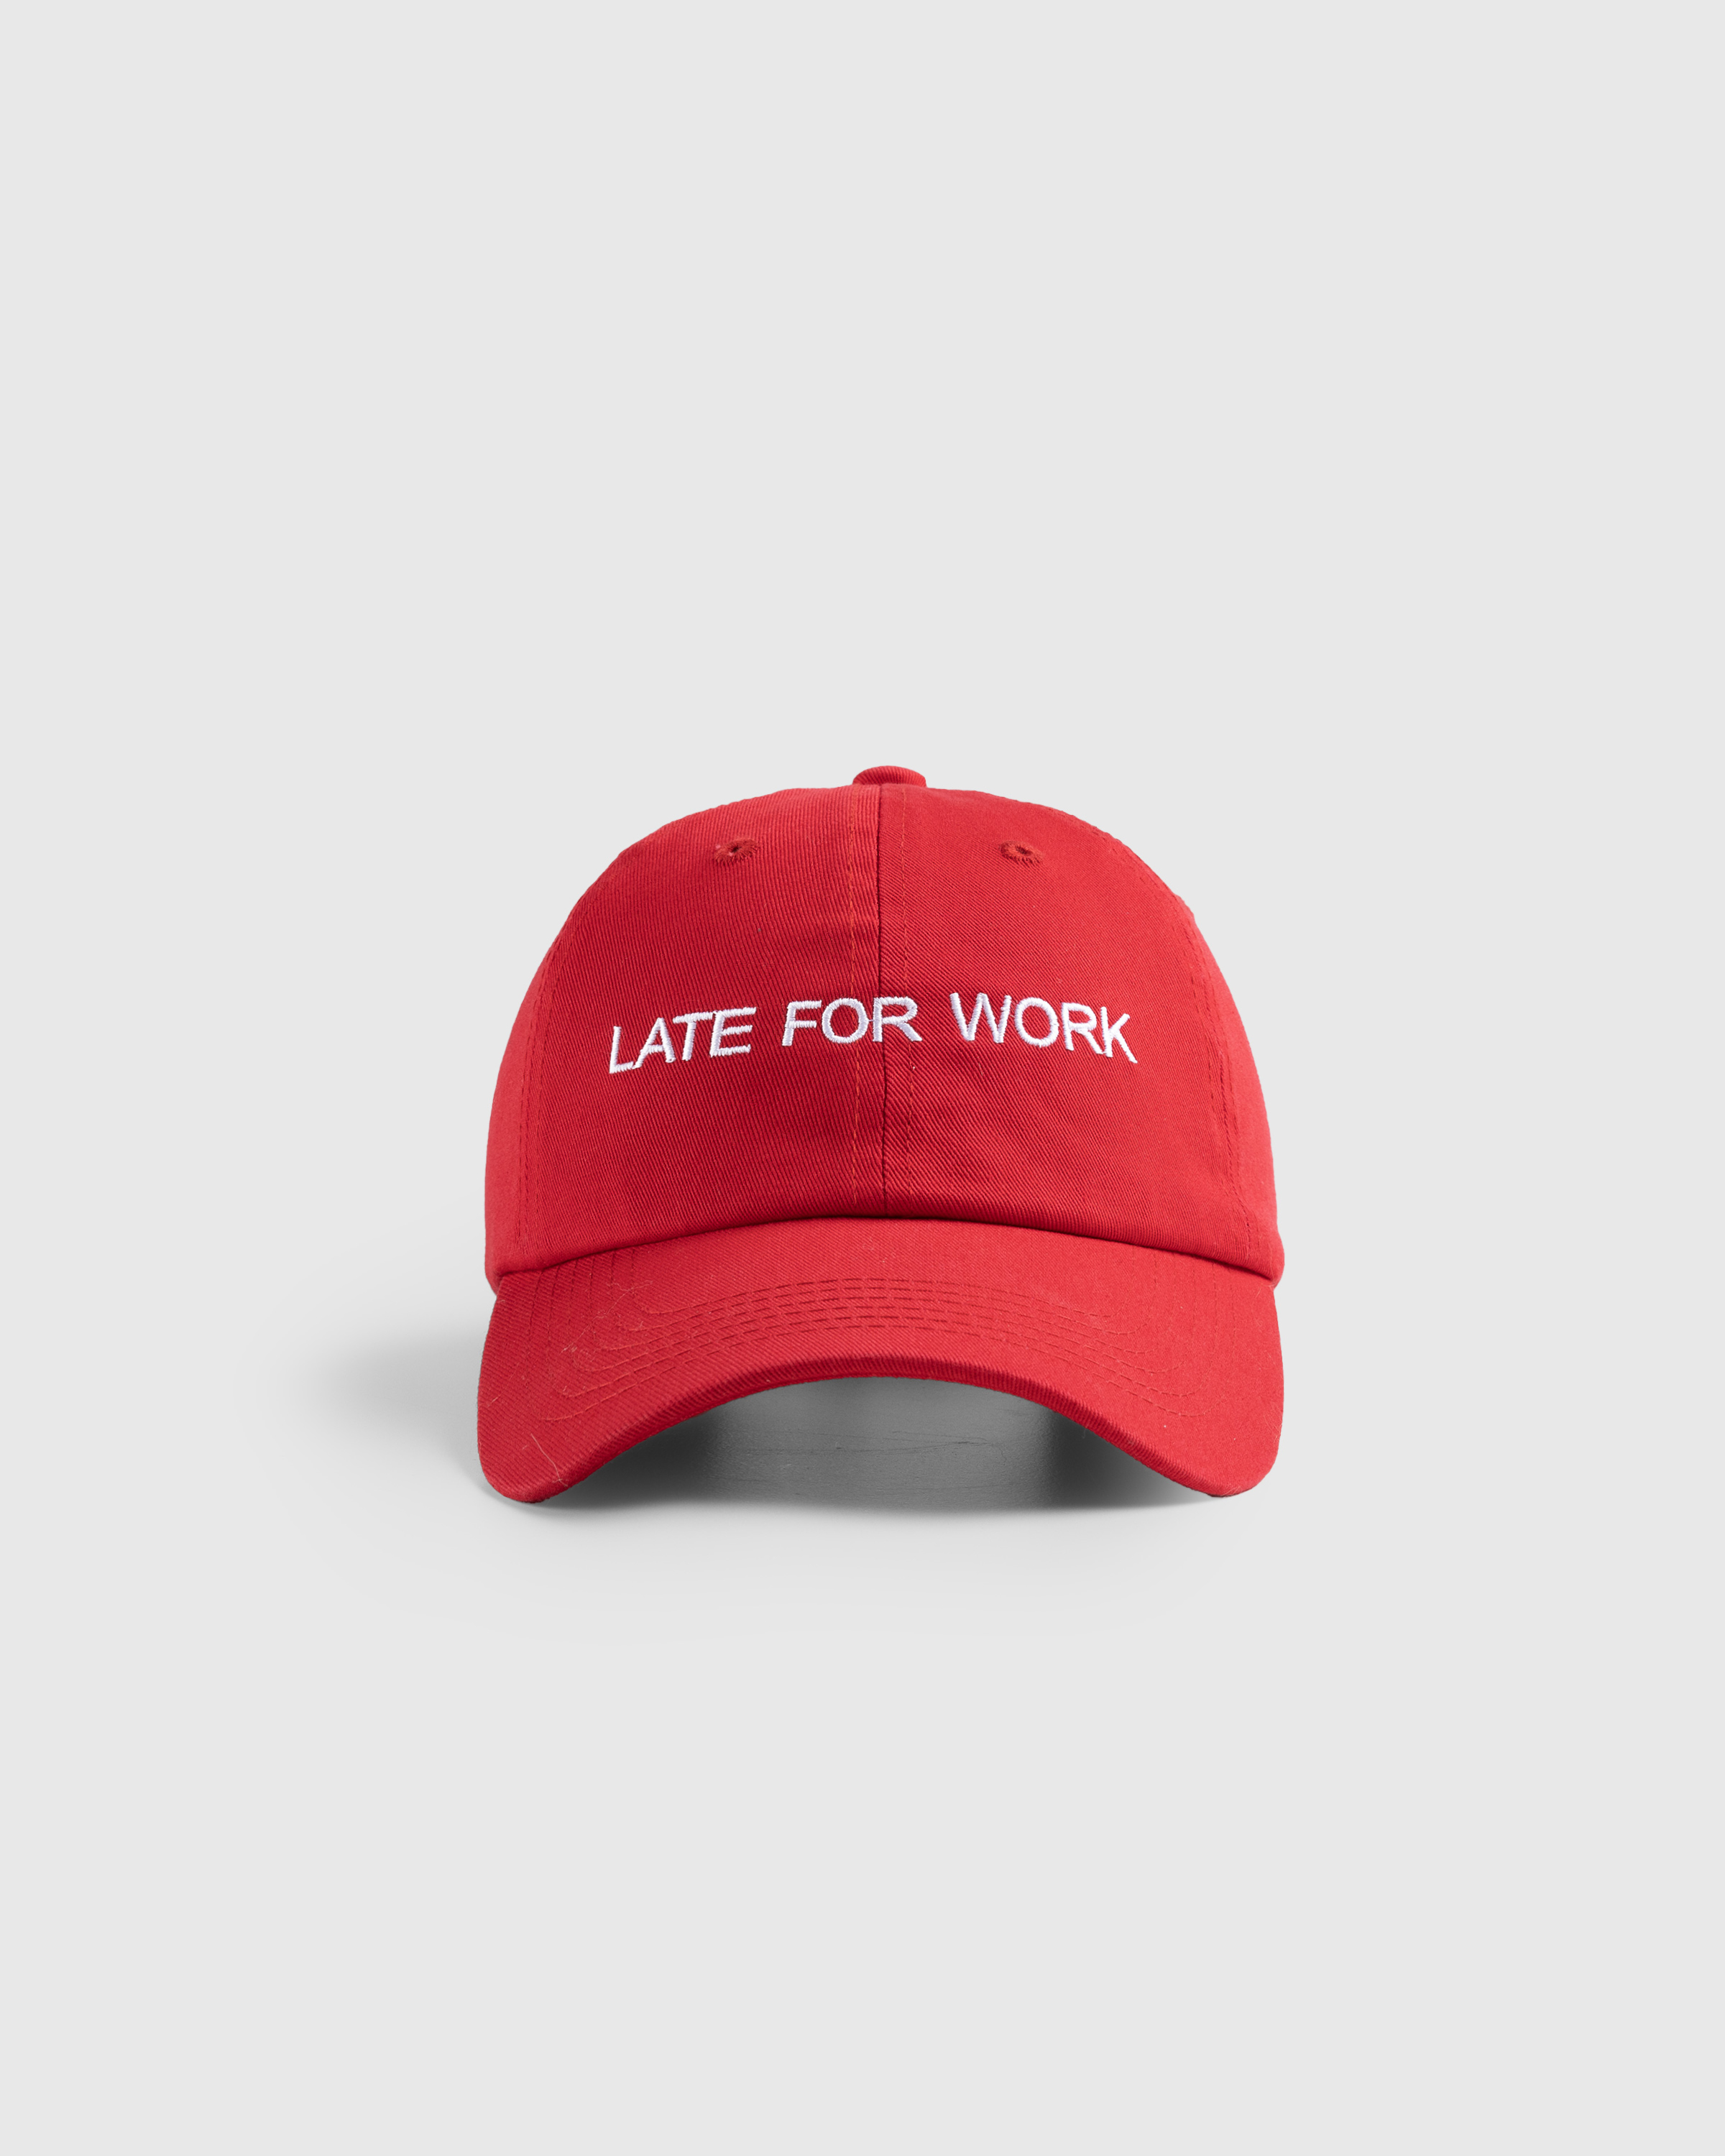 HO HO COCO – Late For Work Hat Red/White - Caps - Red - Image 4